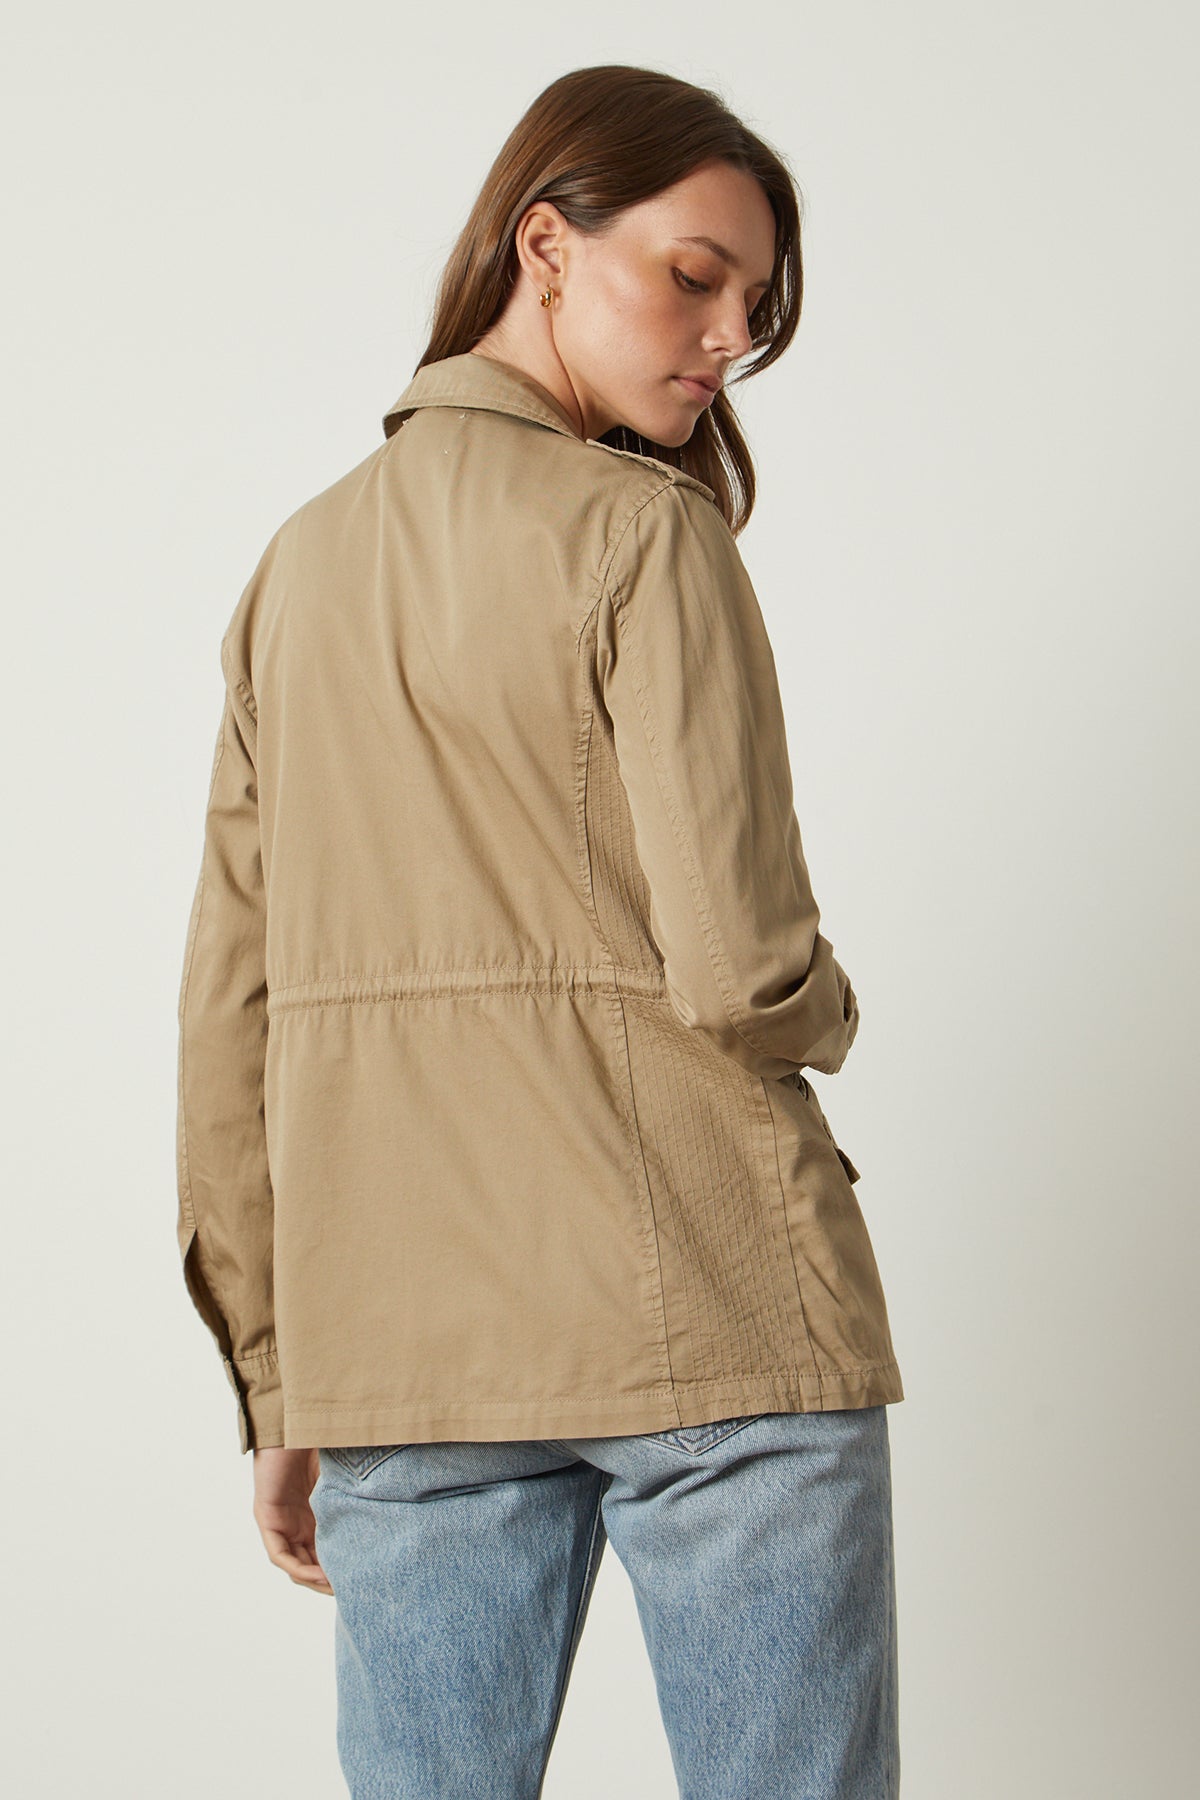 The back view of a woman wearing a Velvet by Graham & Spencer RUBY LIGHT-WEIGHT ARMY JACKET.-26632088551617